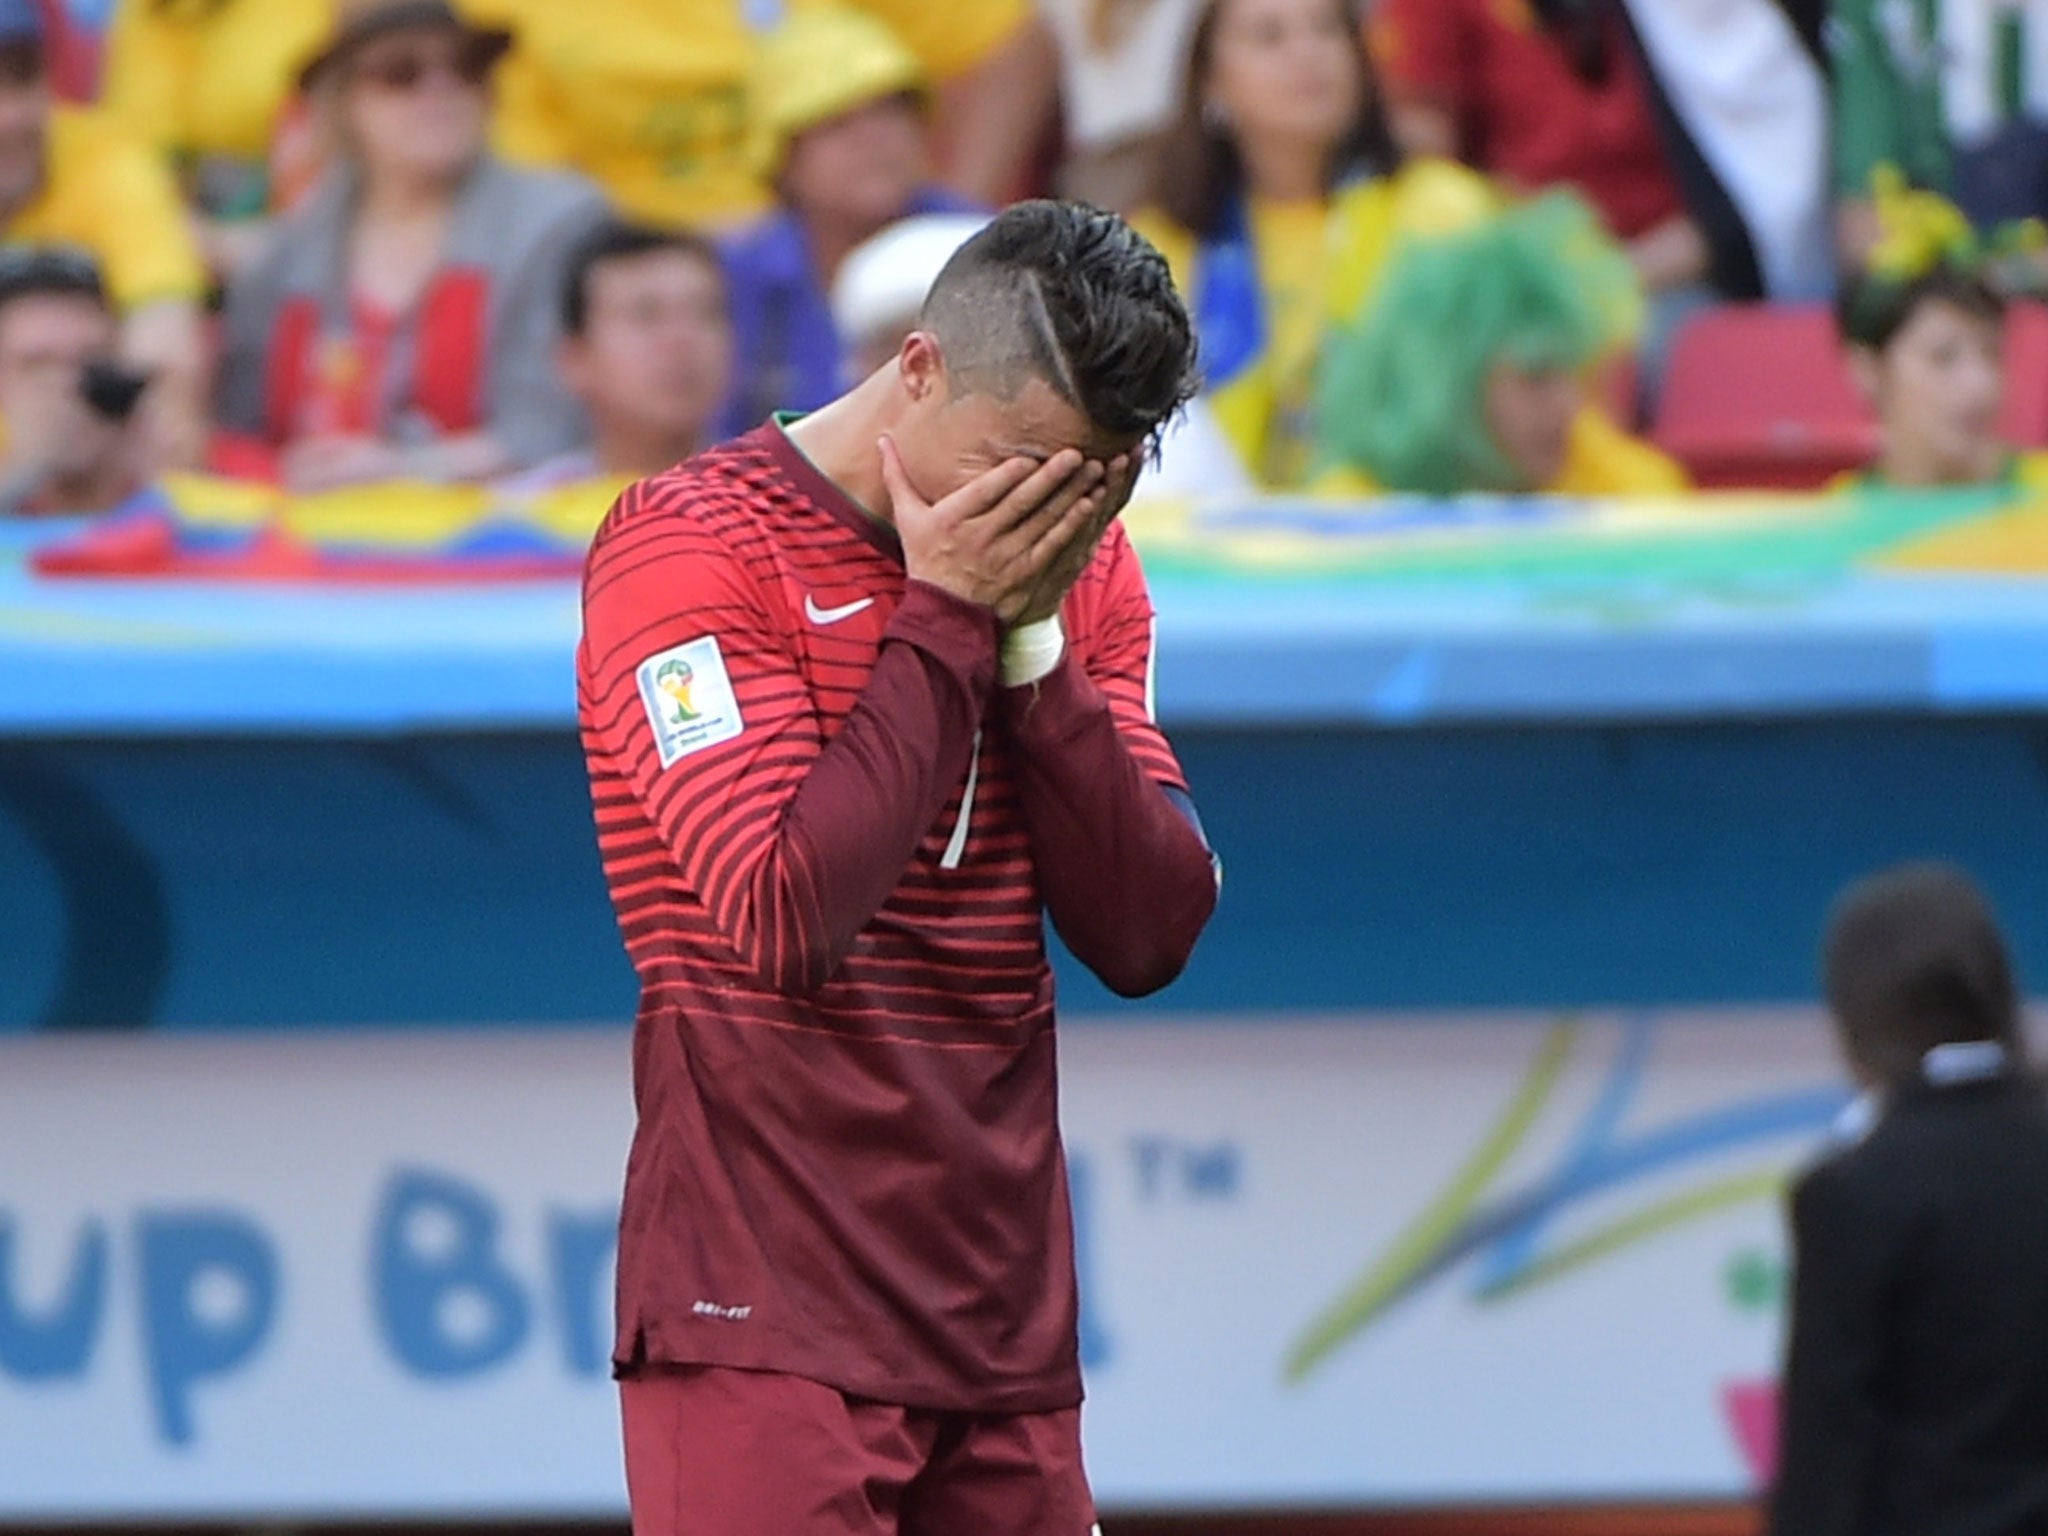 Cristiano Ronaldo can't hide his devastation at the final whistle